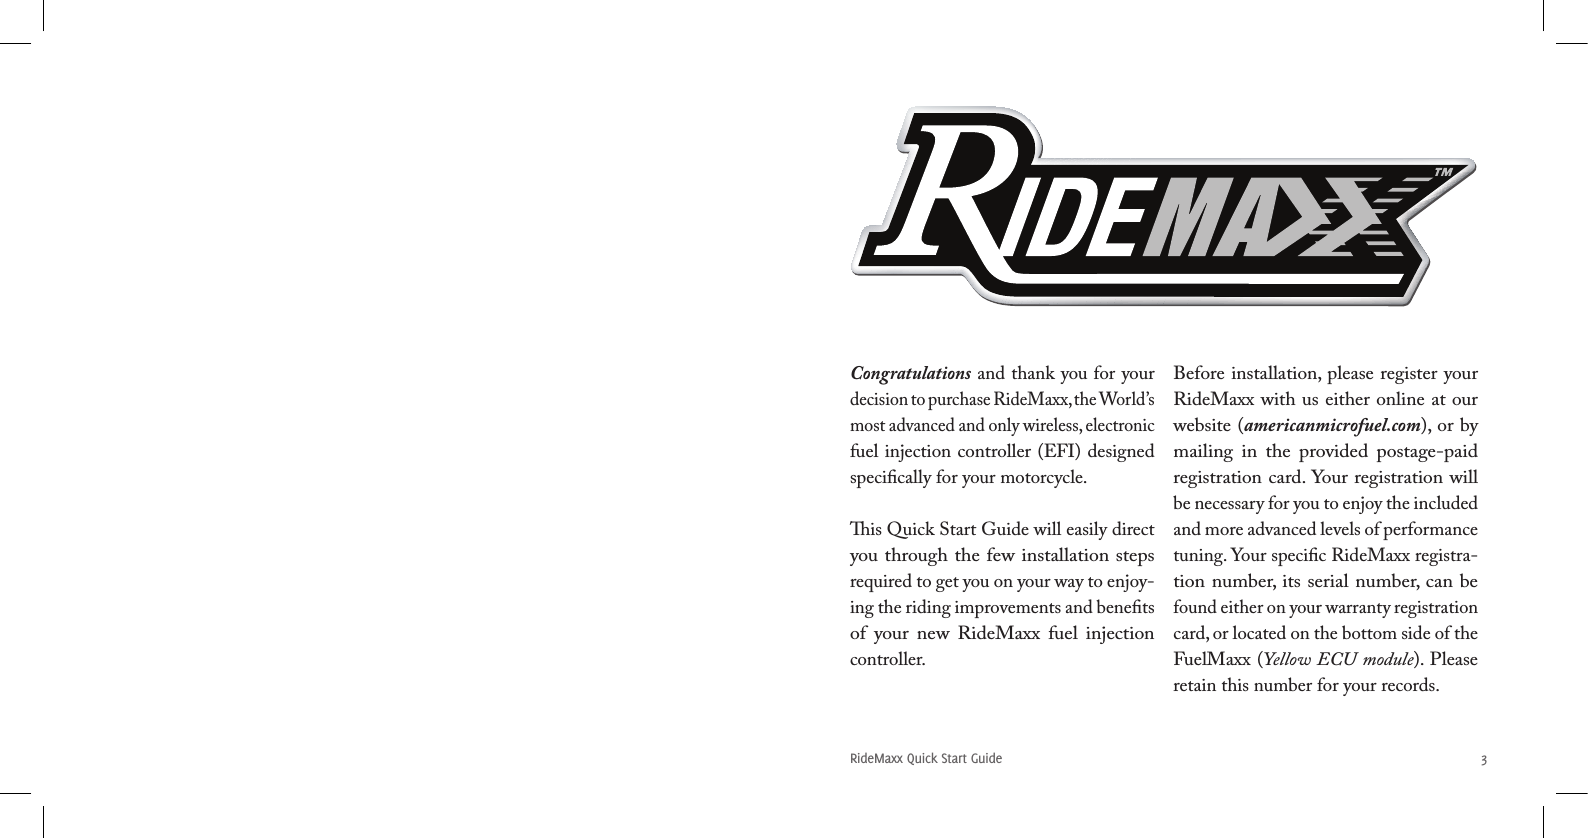 RideMaxx Quick Start Guide 3Congratulations and thank you for your decision to purchase RideMaxx, the World’s most advanced and only wireless, electronic fuel injection controller (EFI) designed speciﬁcally for your motorcycle. is Quick Start Guide will easily direct you through the few installation steps required to get you on your way to enjoy-ing the riding improvements and beneﬁts of  your  new  RideMaxx  fuel  injection controller.  Before installation, please register your RideMaxx with us either online at our website (americanmicrofuel.com), or by mailing  in  the  provided  postage-paid registration card. Your registration will be necessary for you to enjoy the included and more advanced levels of performance tuning. Your speciﬁc RideMaxx registra-tion number, its serial number, can be found either on your warranty registration card, or located on the bottom side of the FuelMaxx (Yellow ECU module). Please retain this number for your records. 